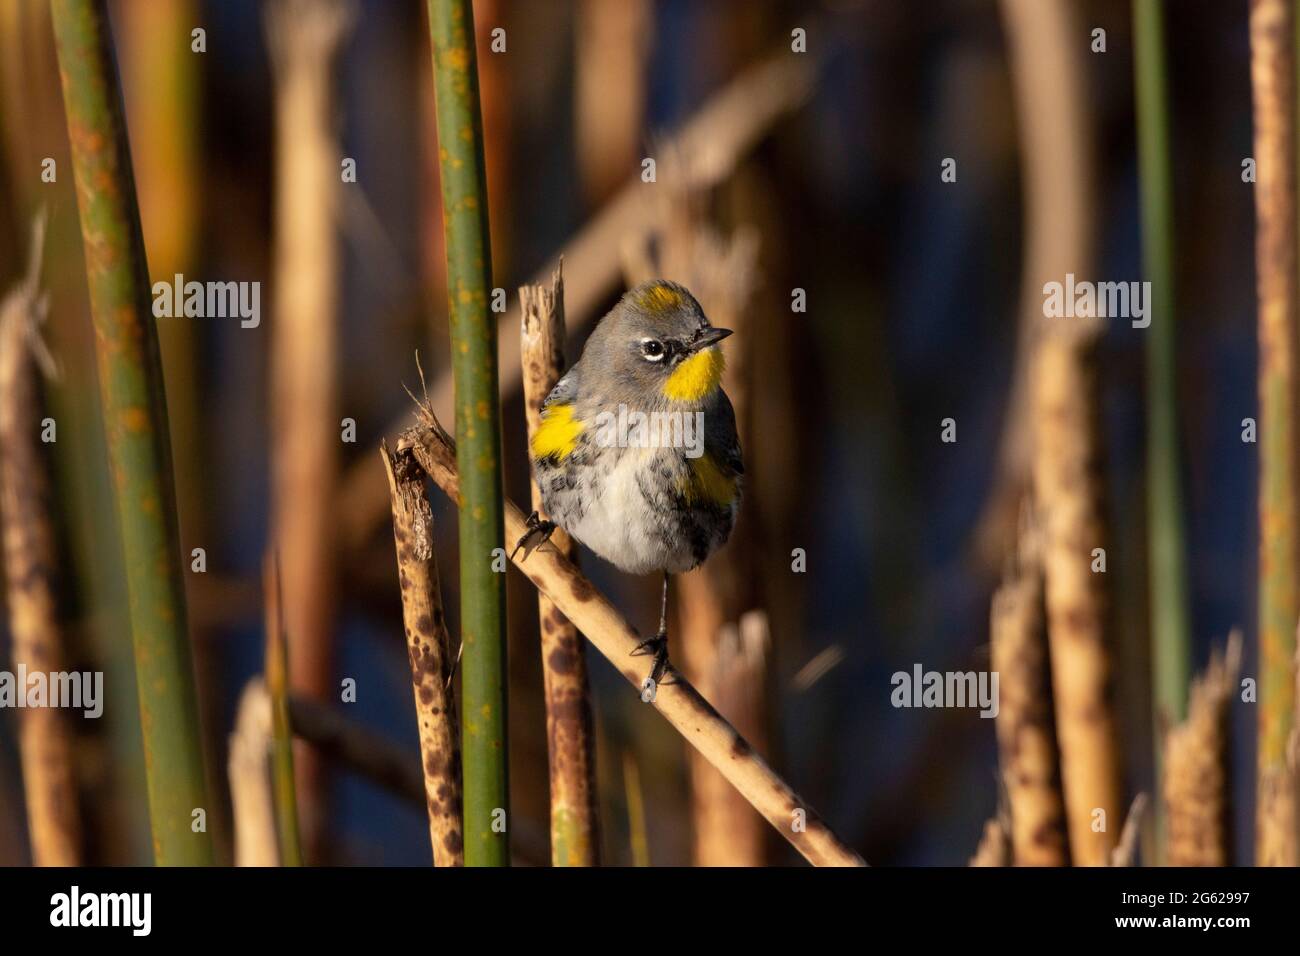 A male Yellow-rumped Warbler, Dendroica coronata, perches on Hardstem Bulrush in California's Merced NWR in the San Joaquin Valley. Stock Photo